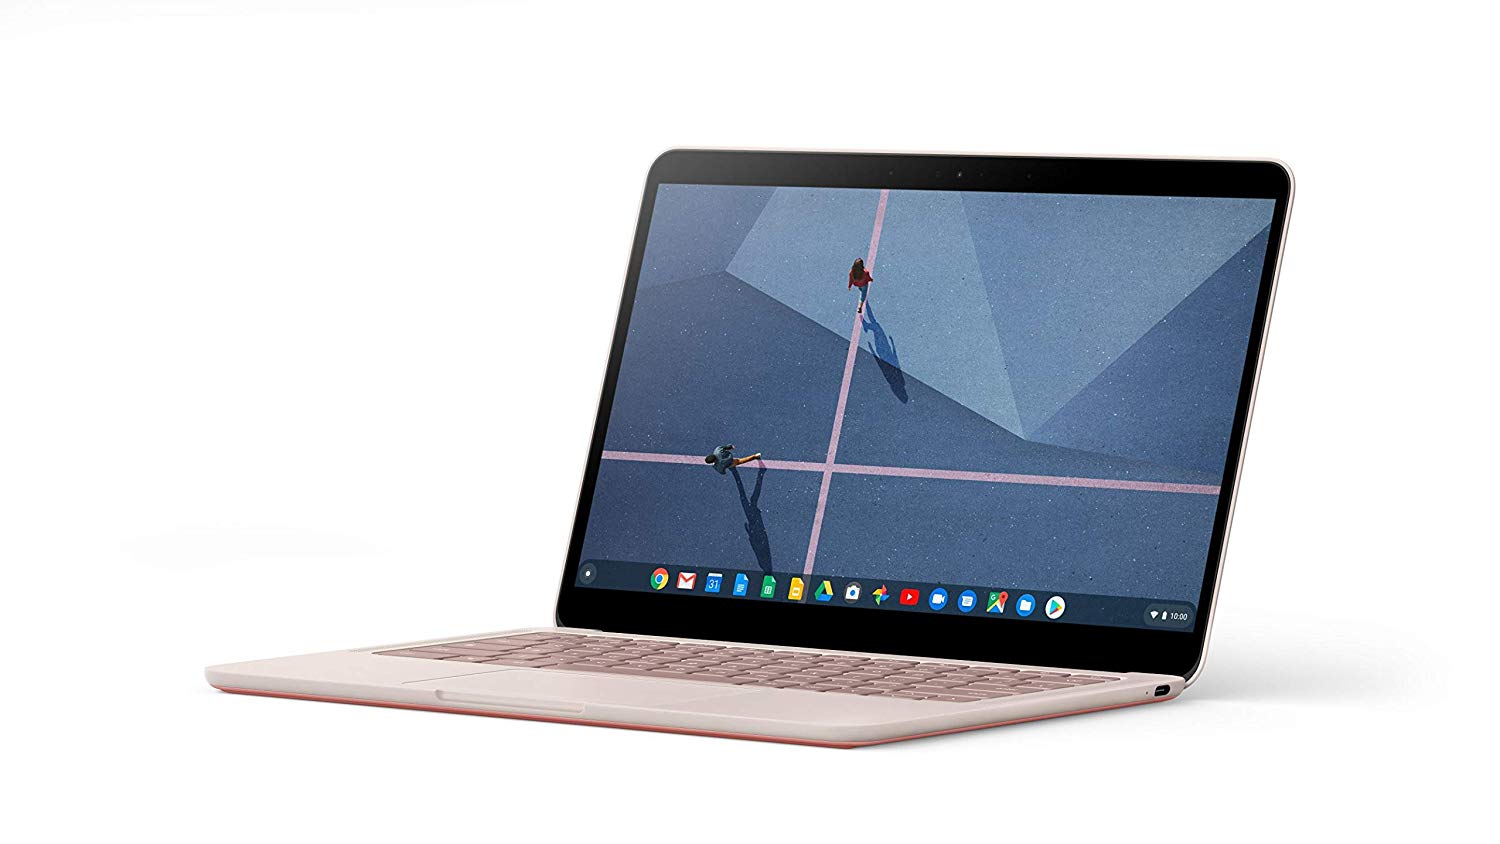 Google Pixelbook Go at an angle against a white background